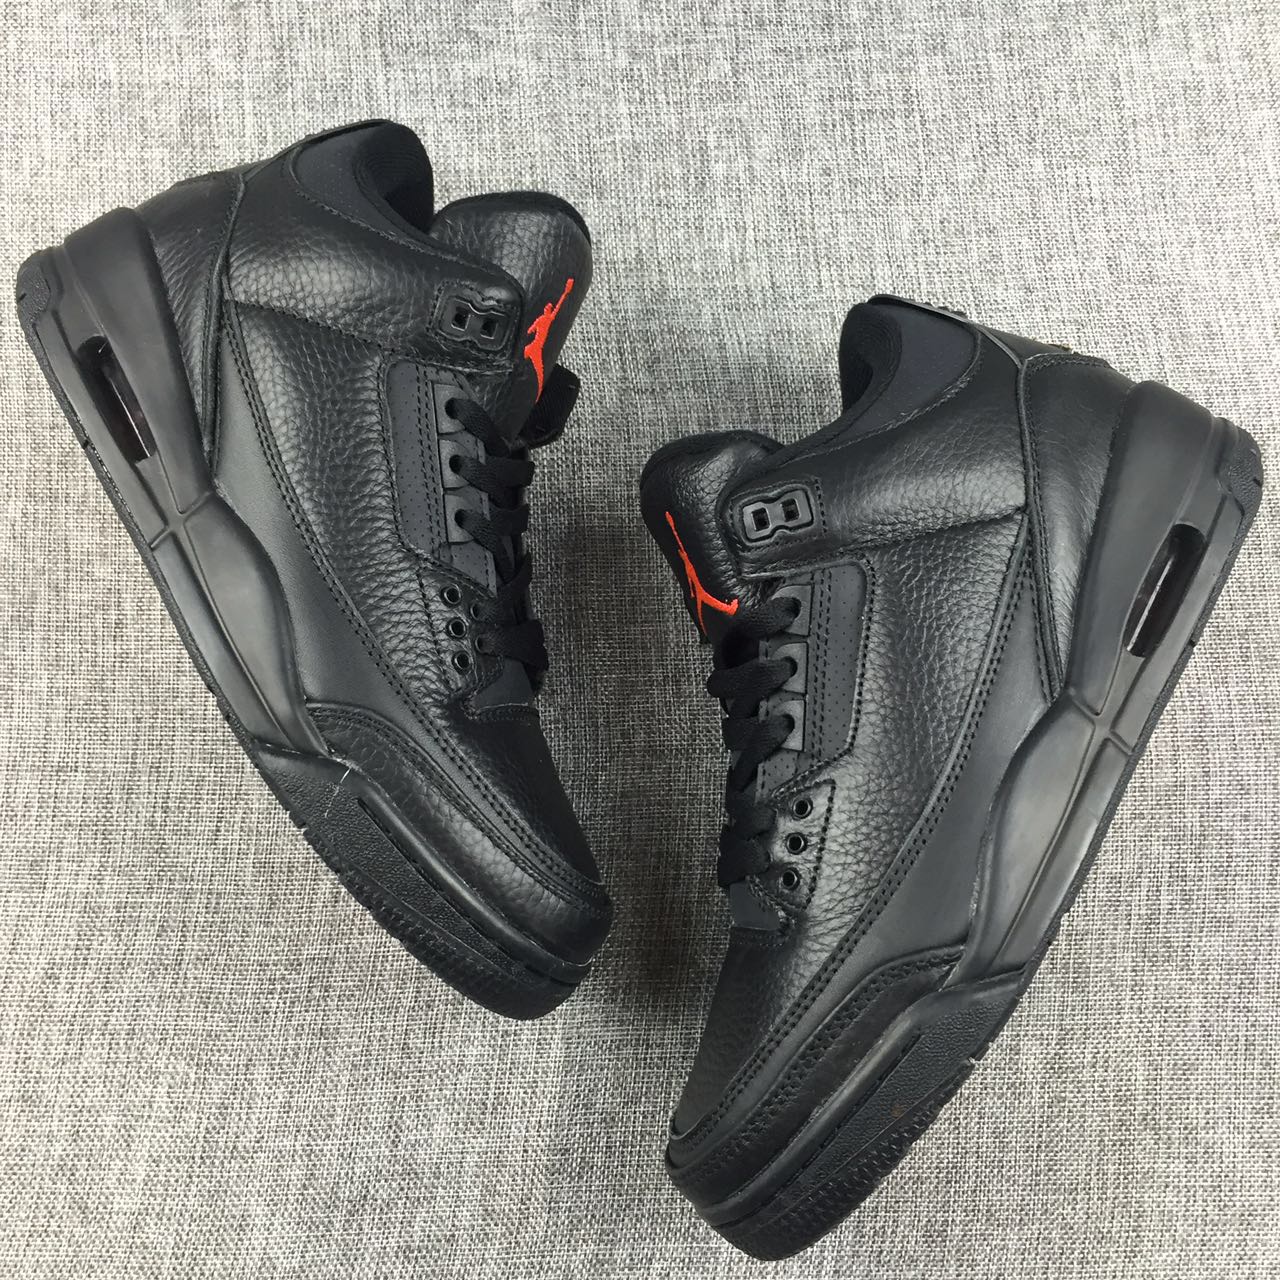 New Air Jordan 3 OVO Black Red Shoes - Click Image to Close